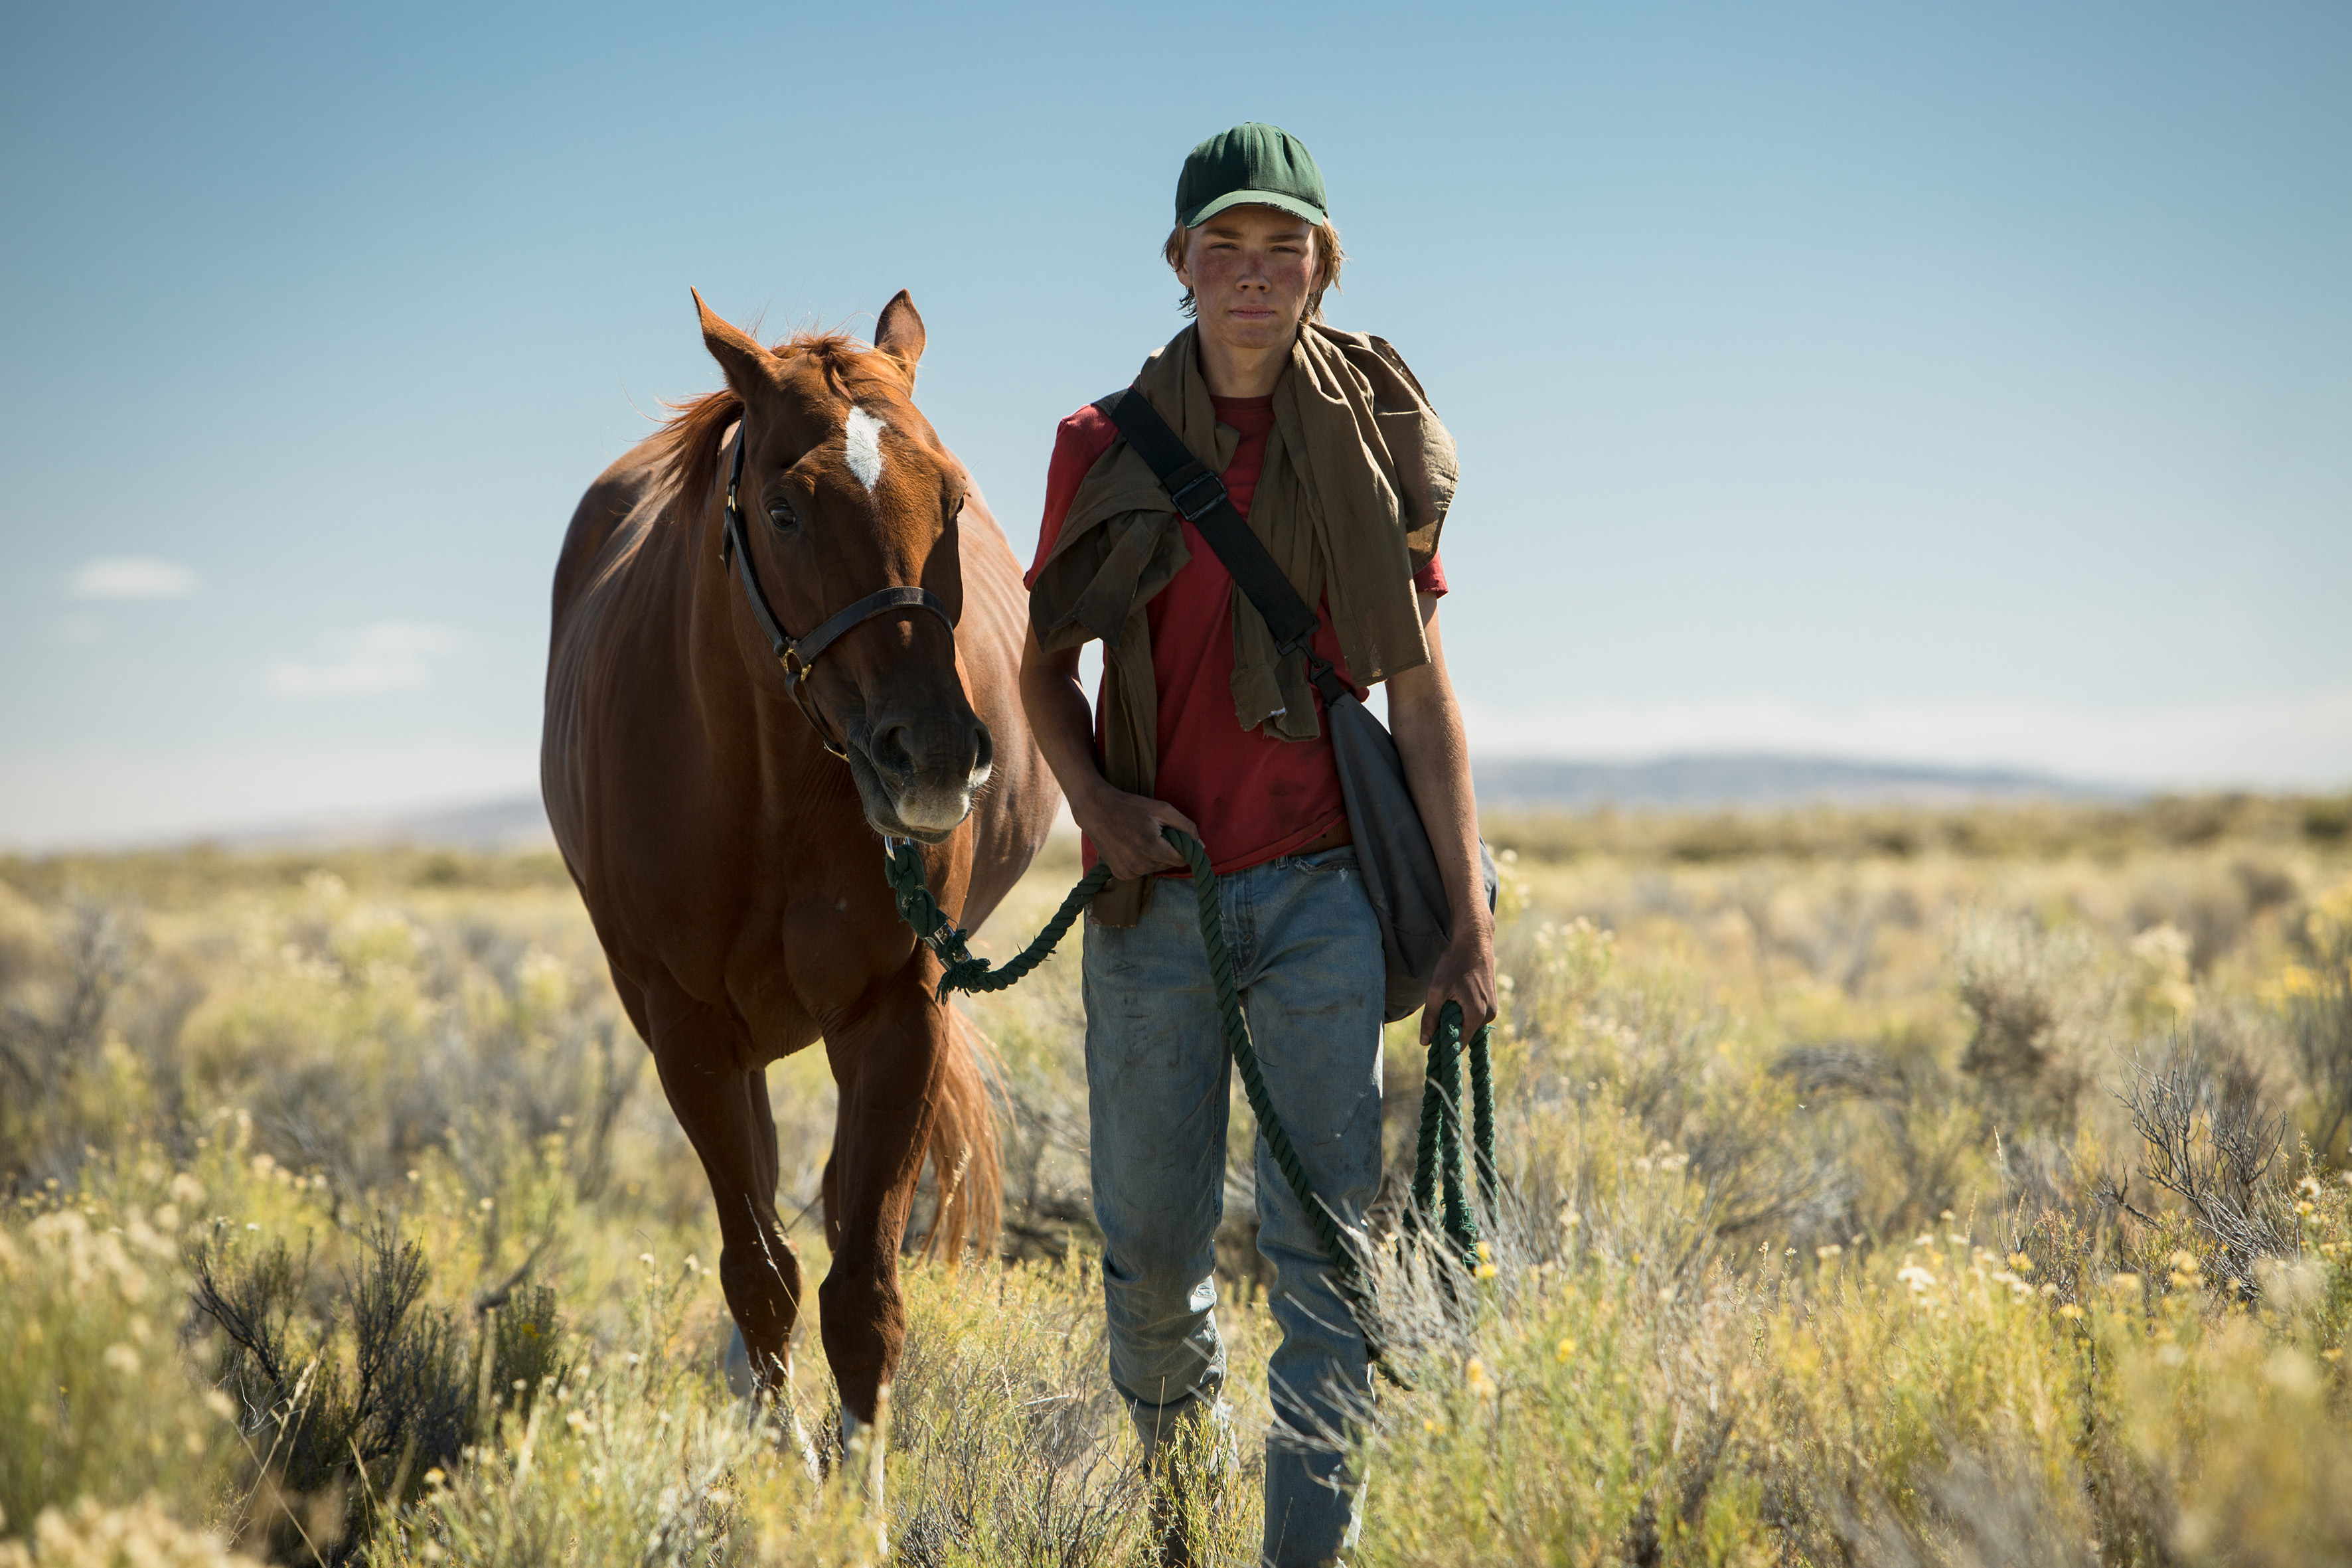 Lean on Pete review: Dir. Andrew Haigh (2018)